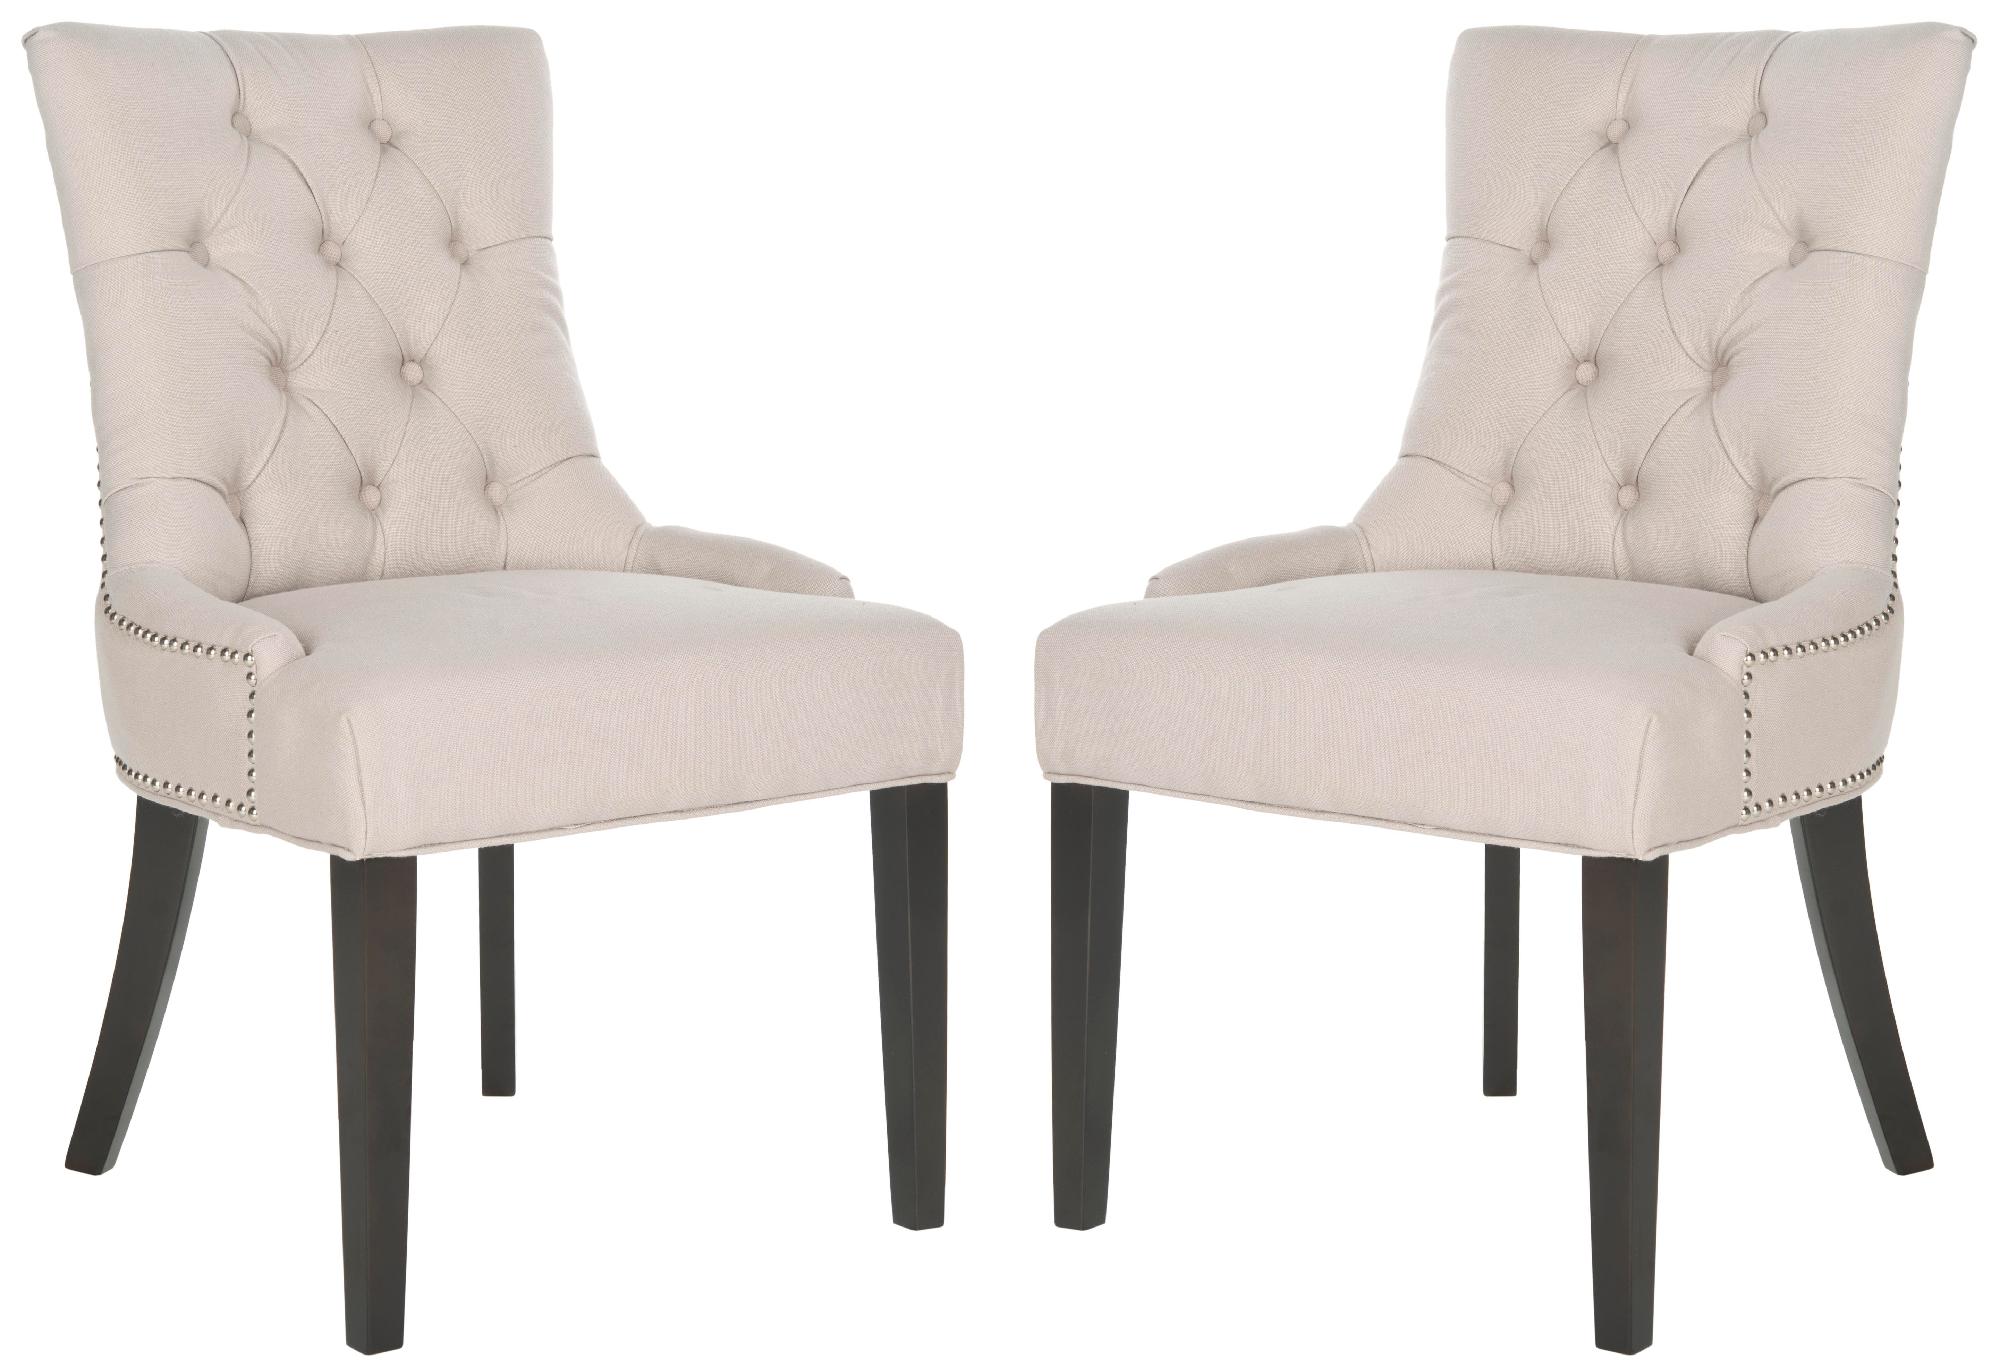 Safavieh Harlow 19''H Tufted Ring Chair (Set Of 2) - Silver Nail Heads